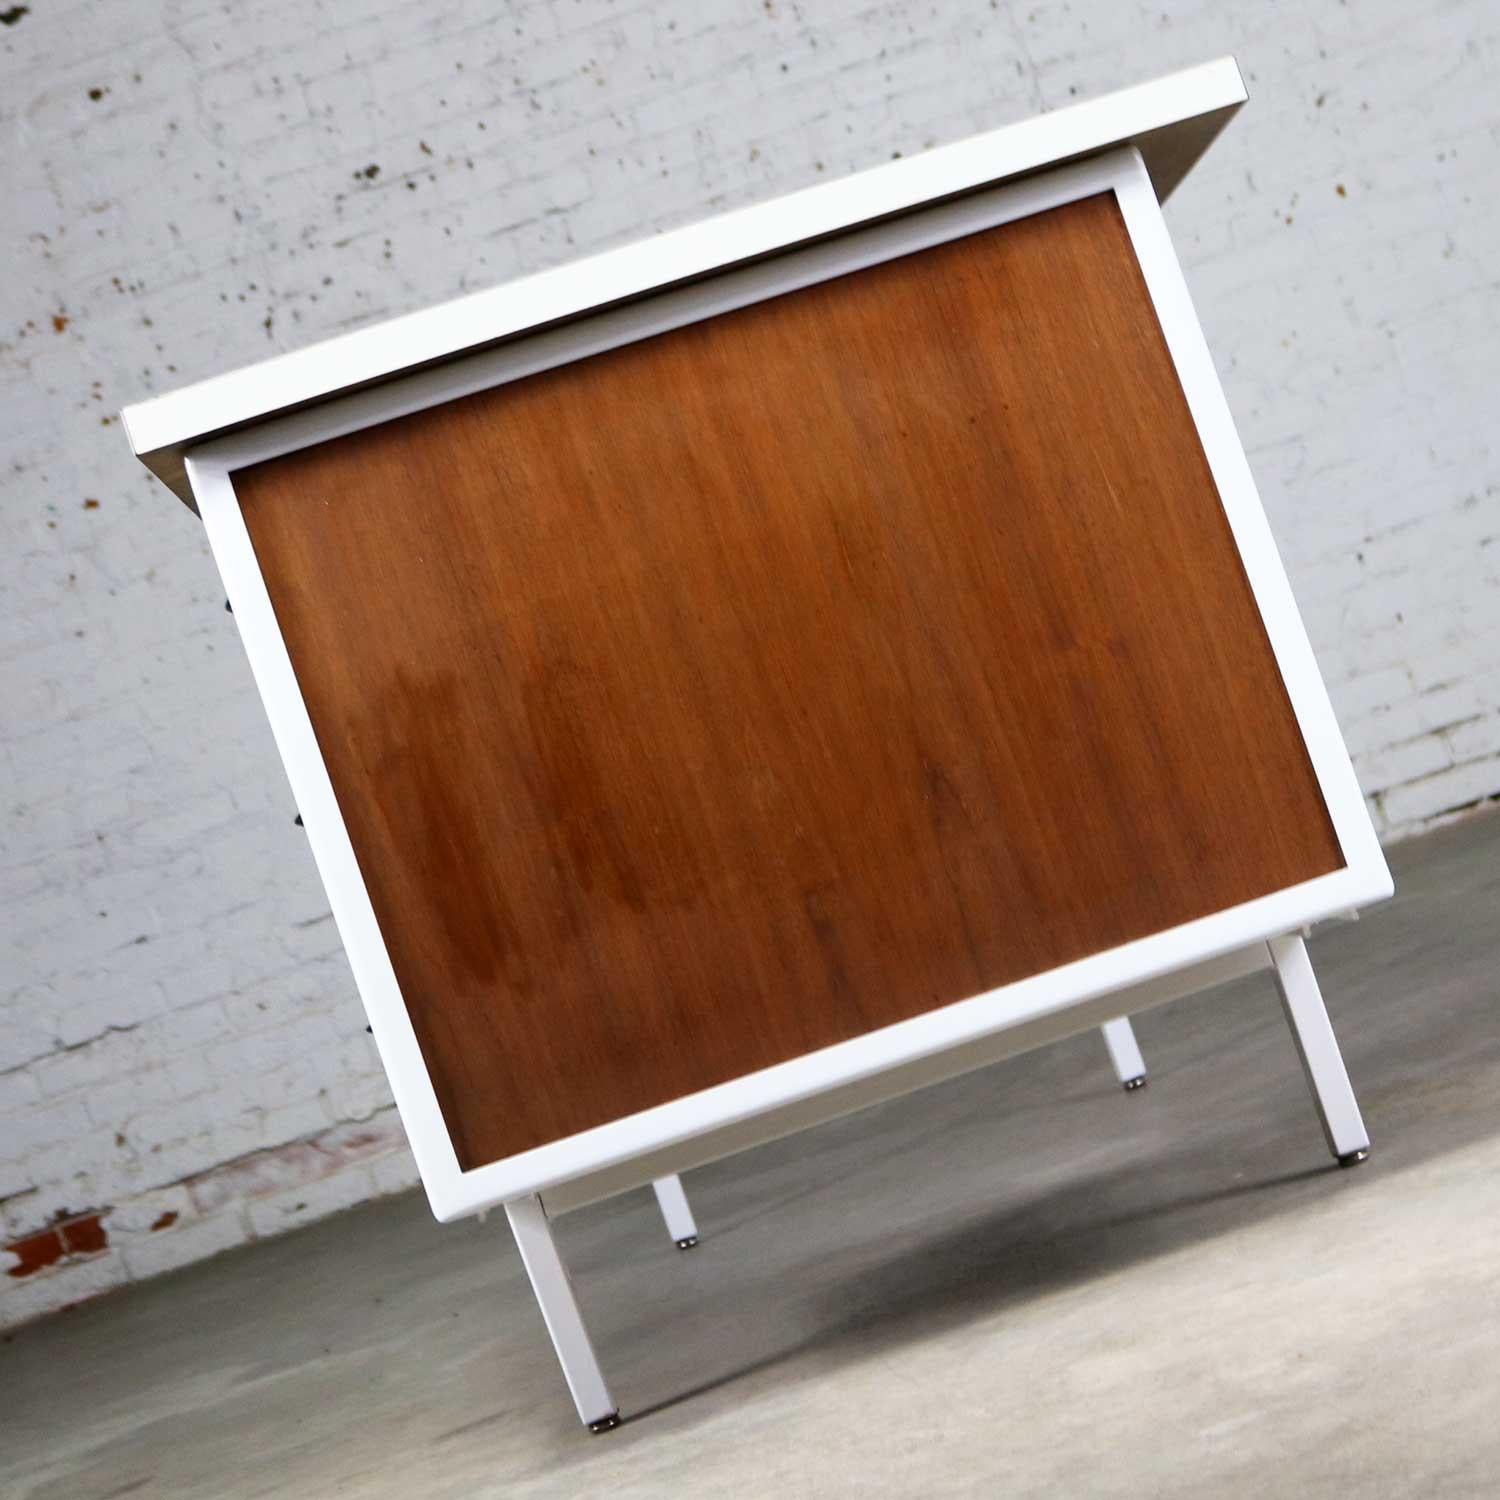 American MCM Desk by Robert John Co. Walnut & White Painted Steel Frame & Laminate Top For Sale